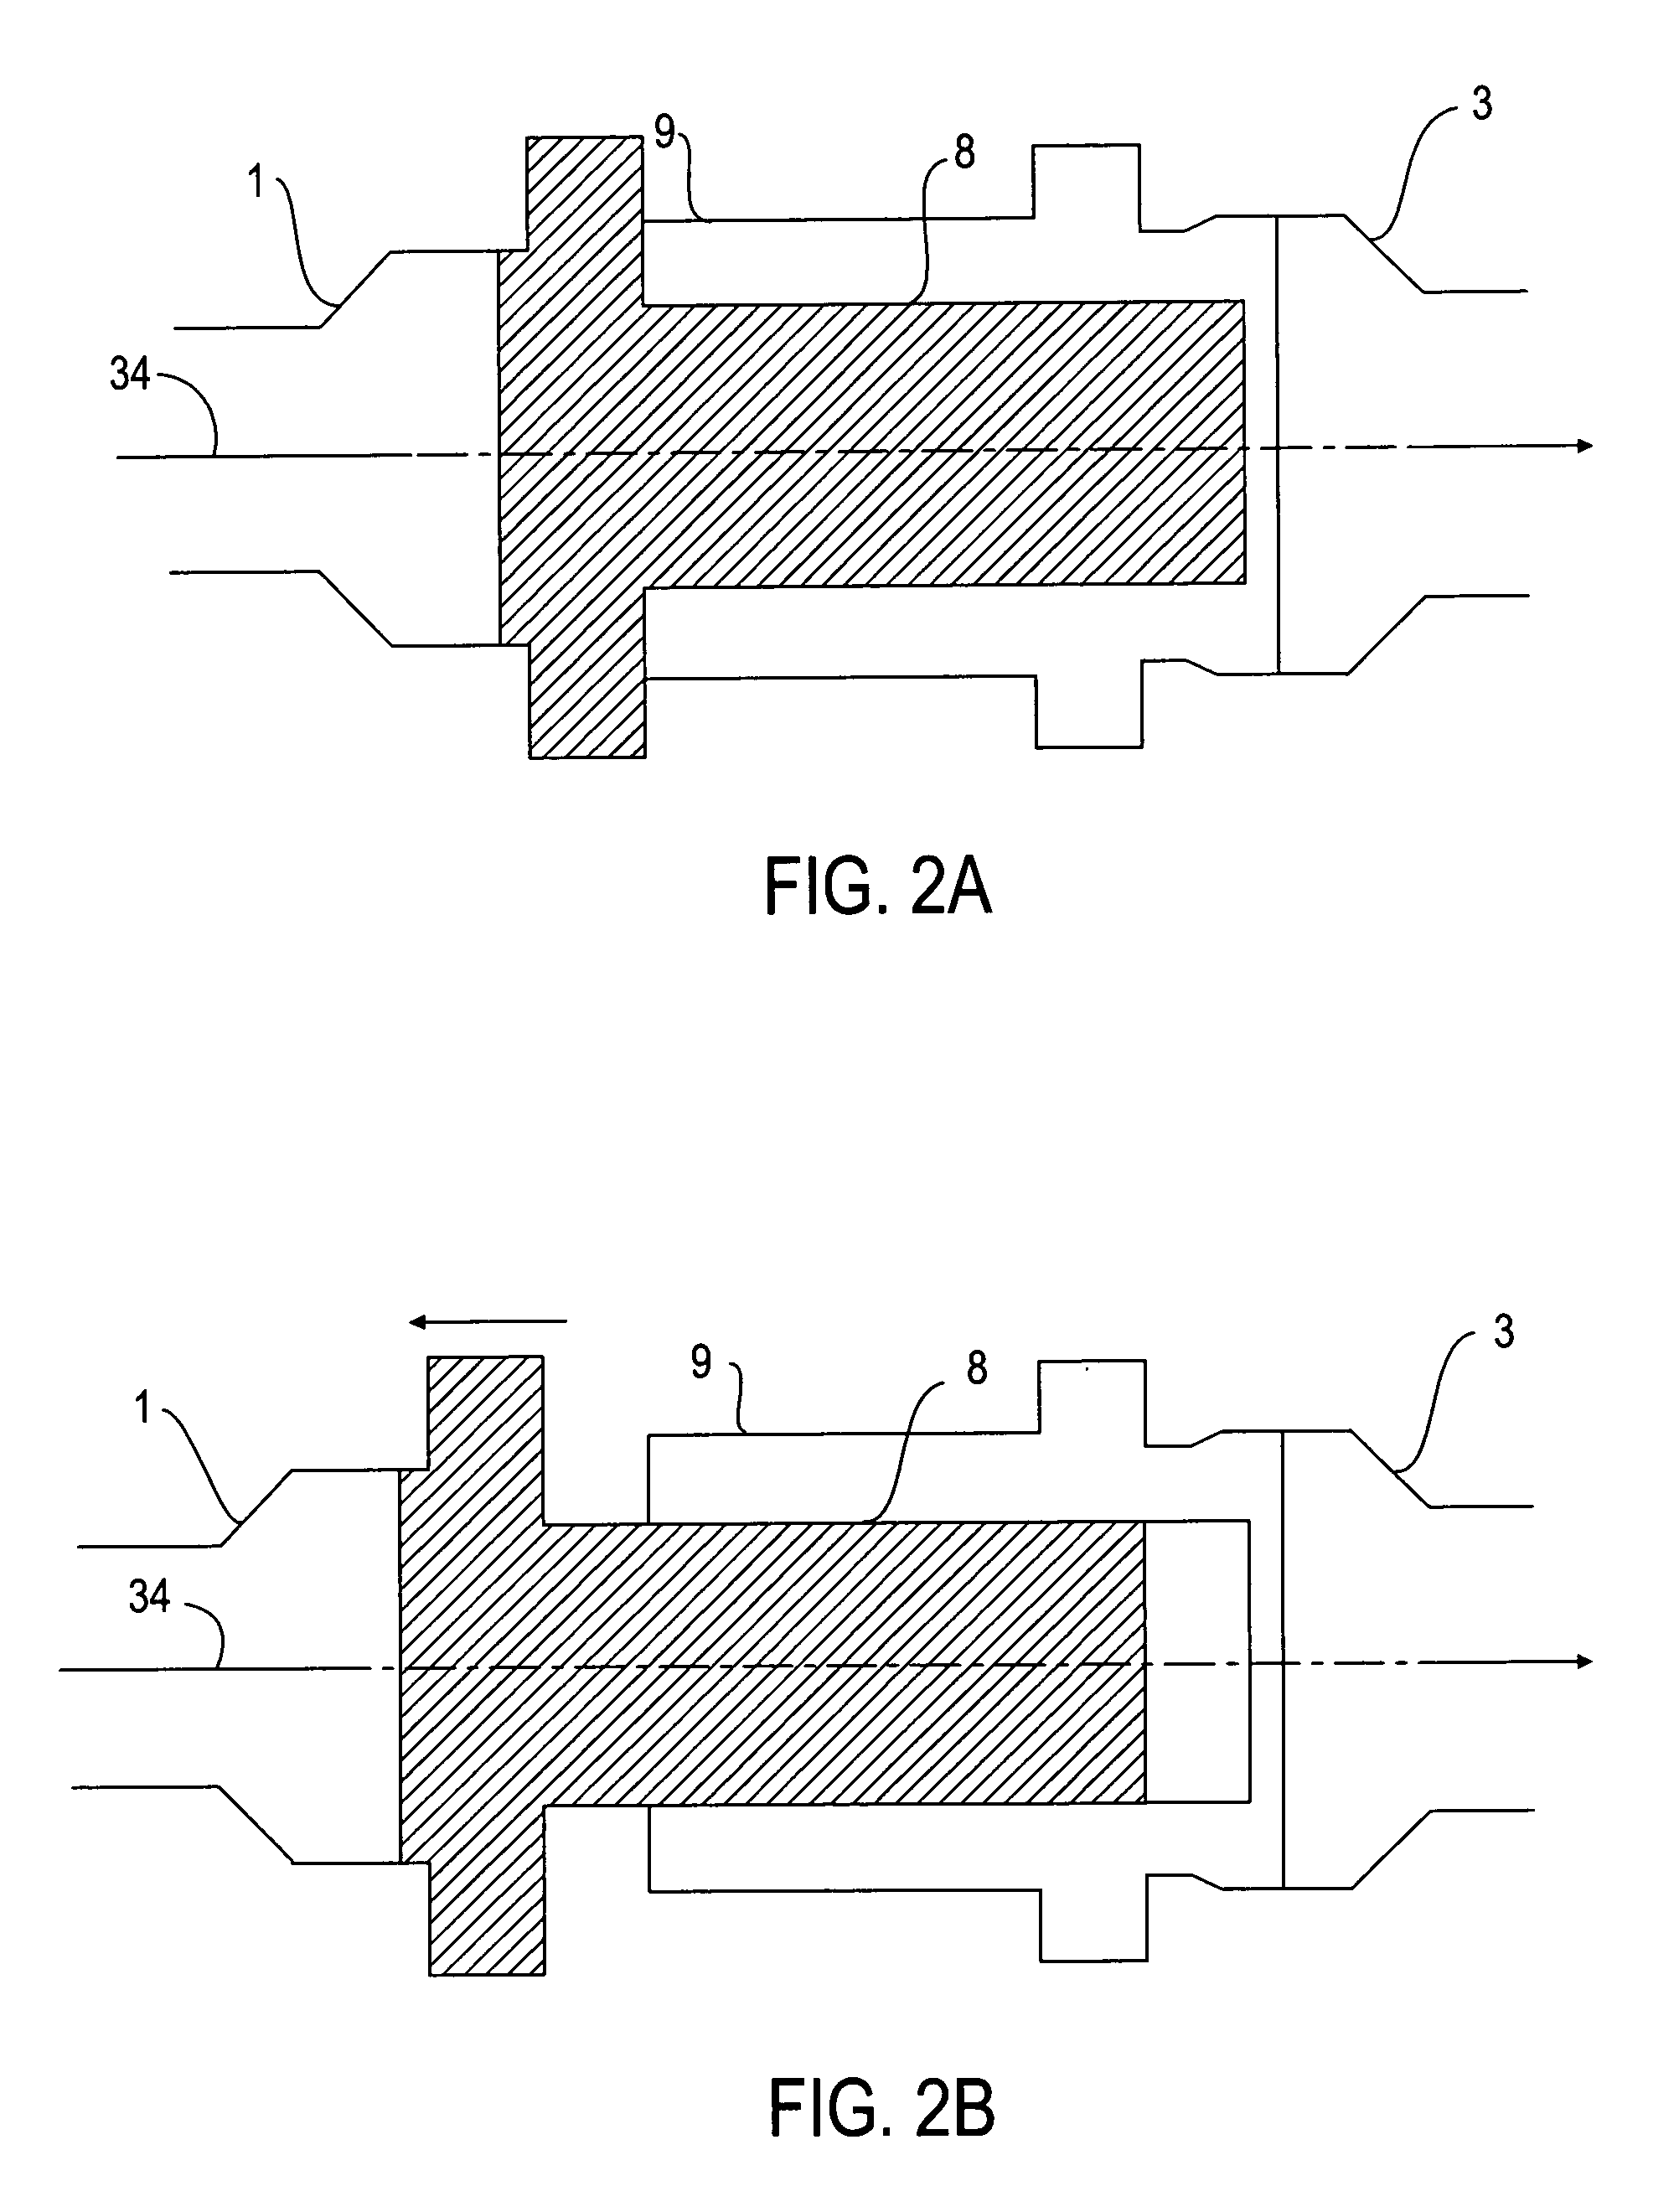 Autoclavable coupler for endoscopic camera system